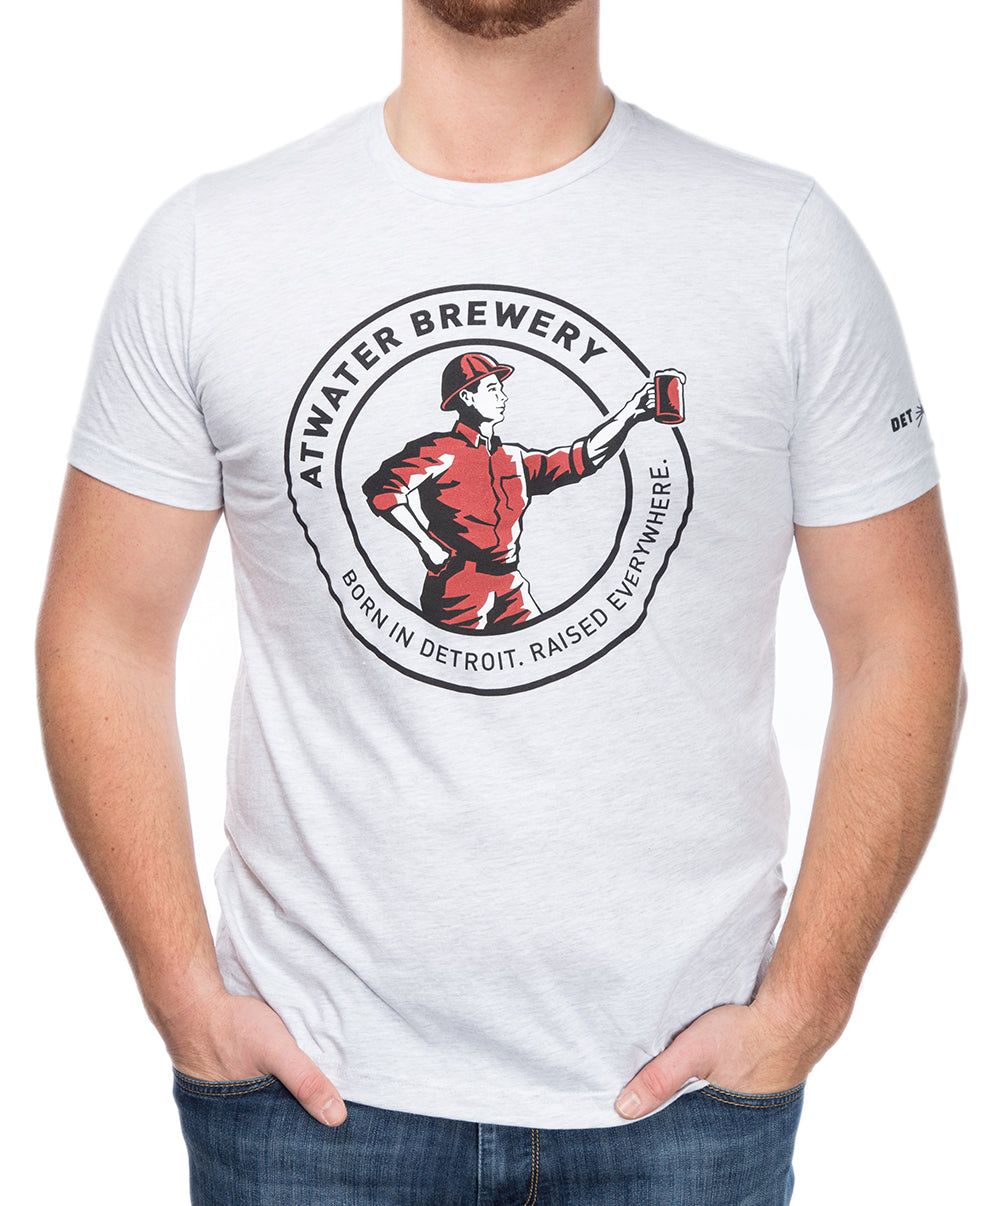 ATWATER BREWERY TEE